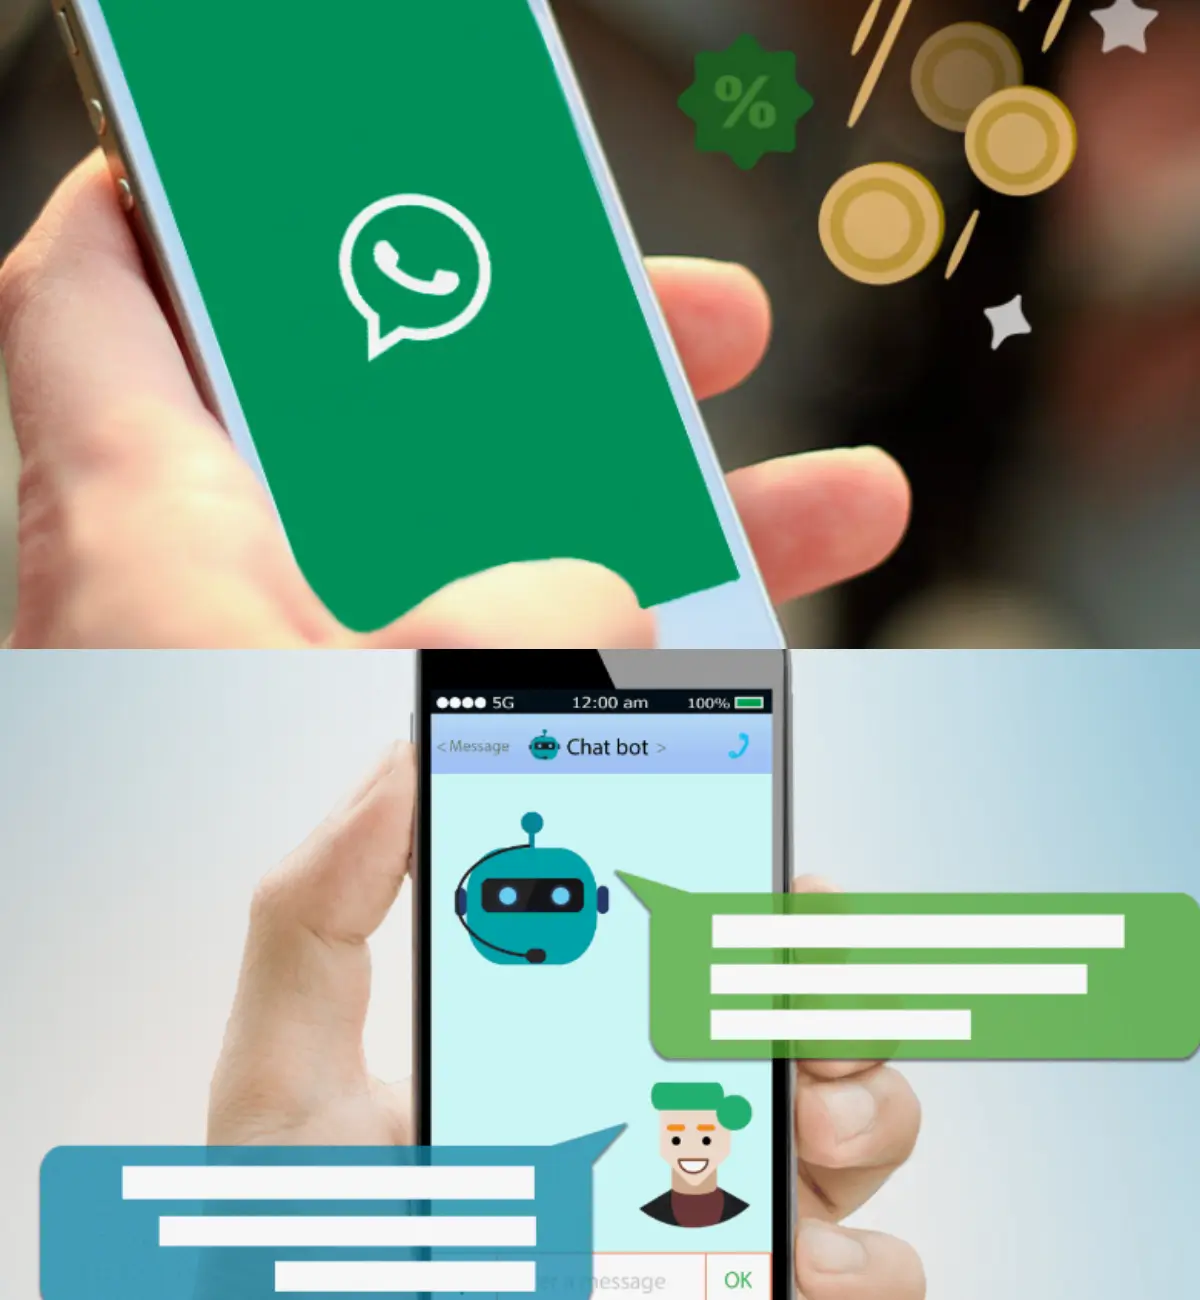 WhatsApp tests a Meta AI chatbot in India and other countries.